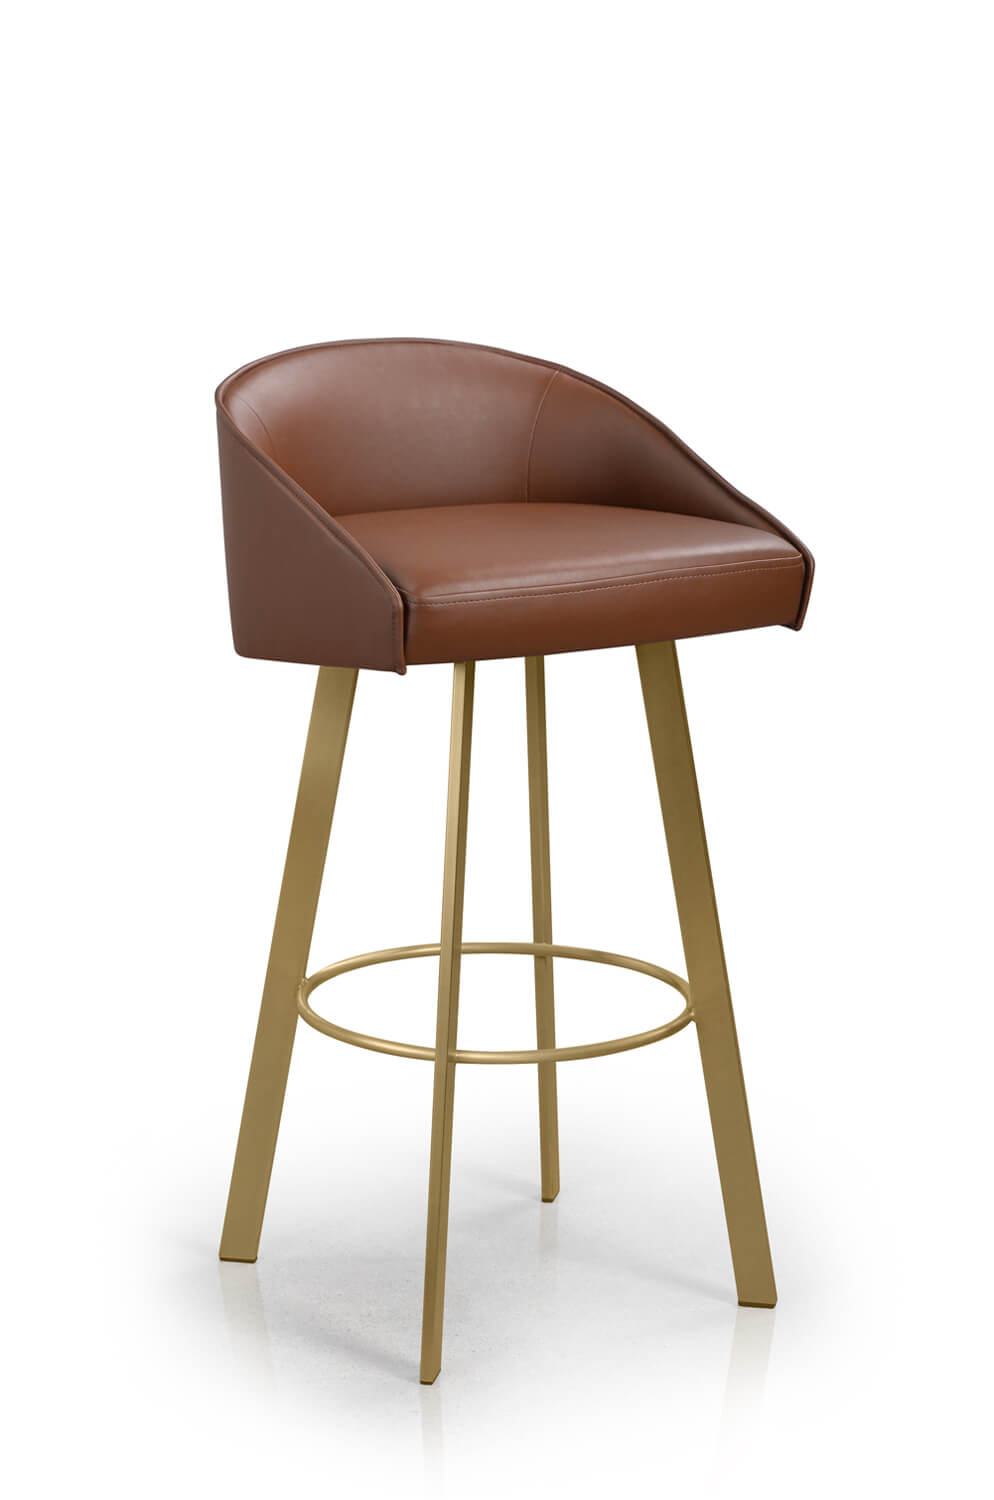 Trica S Liv Swivel Bar Stool With, Trica Bar Stools